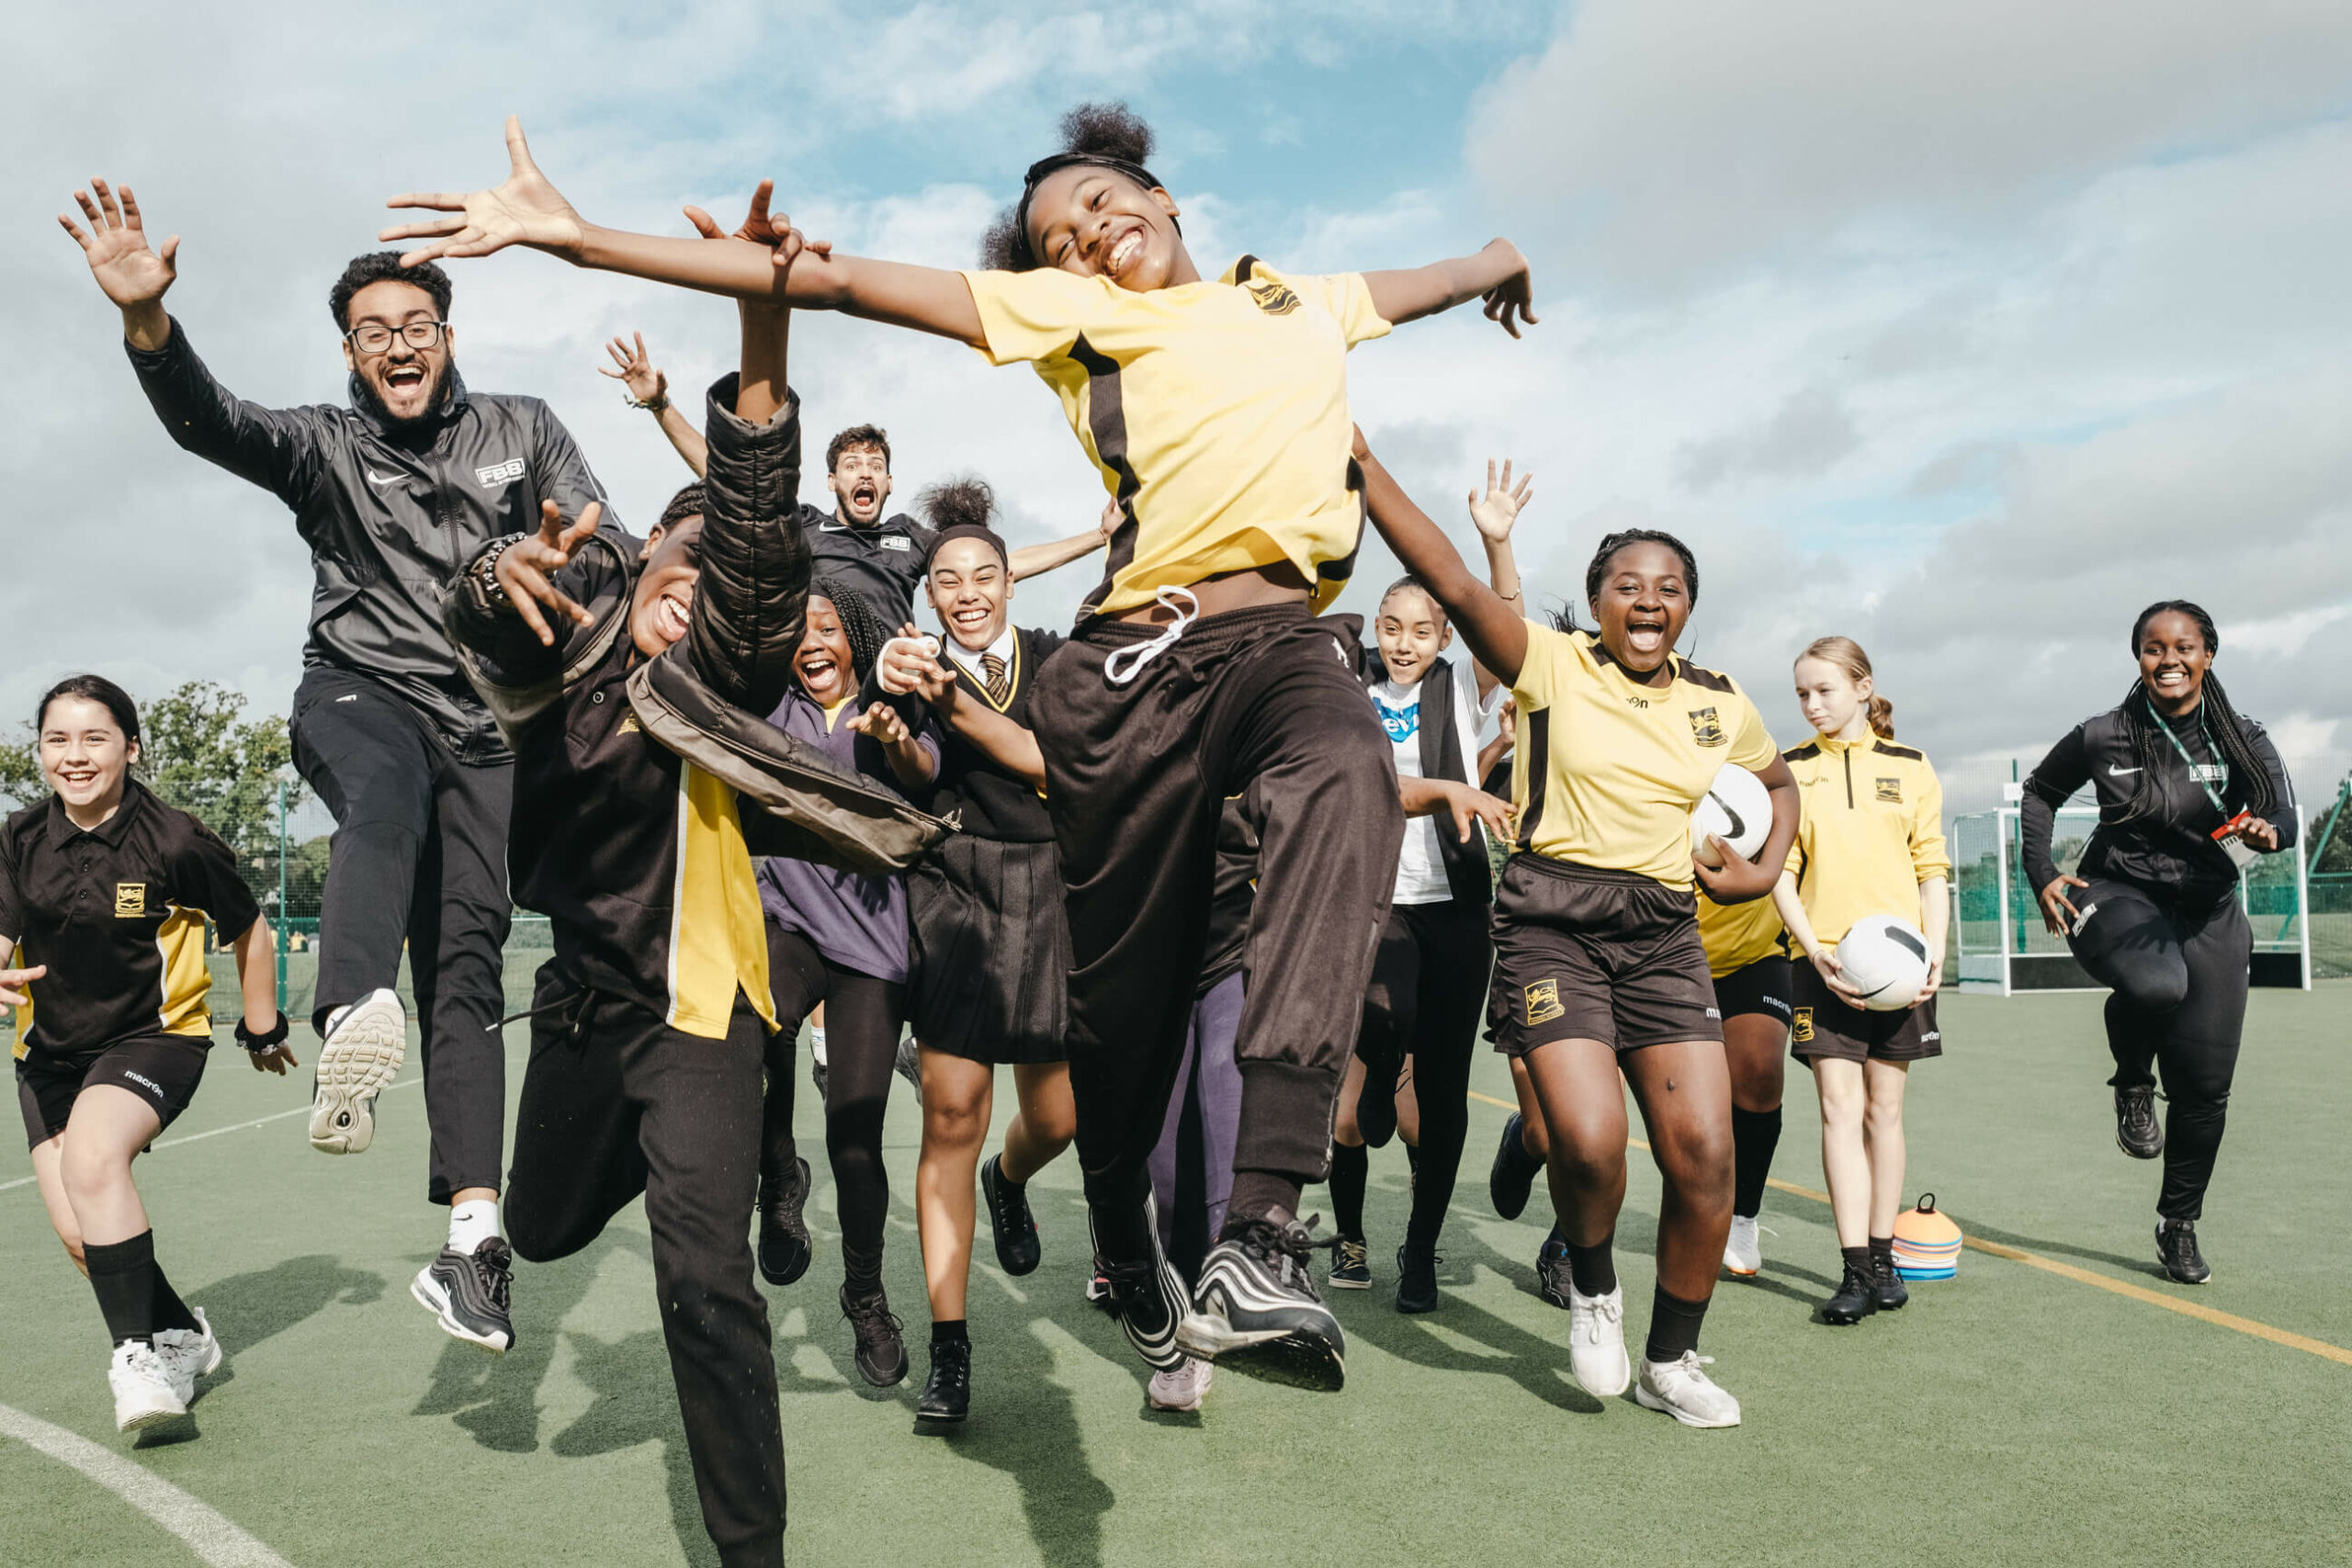 A group of around 12 children and teens, jumping, spreading their arms in joy and smiling at the camera. They are stood on a football field and wearing yellow football kits or school uniform.